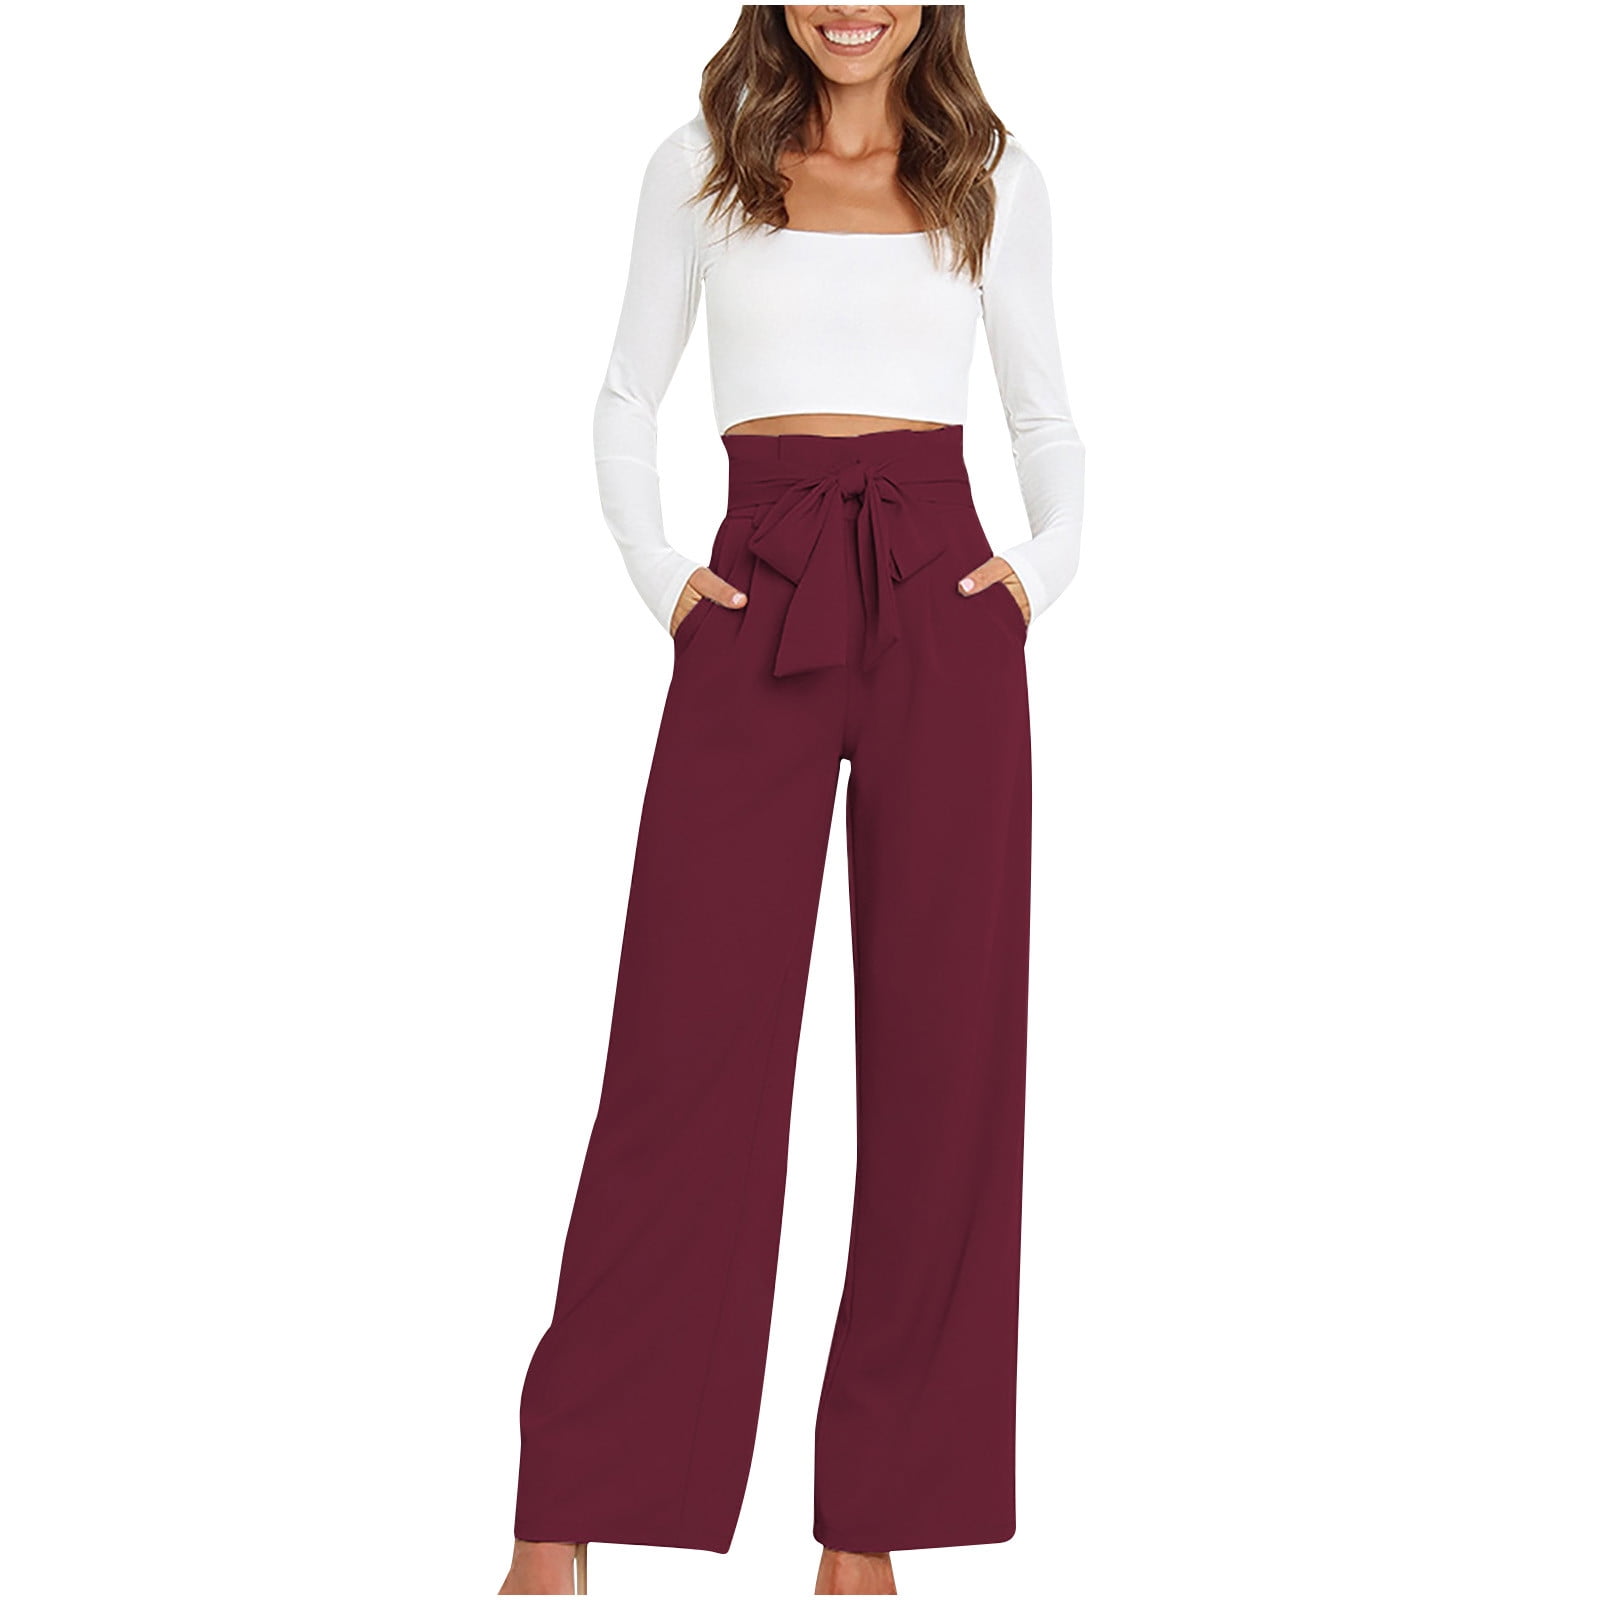 Fashion (Burgundy)Womens Plus Size High Waist Wide Leg Maxi Long Pants  Solid Color Office Lady Loose Stretch Pleated Palazzo Lounge Trousers S-3X  WEF @ Best Price Online